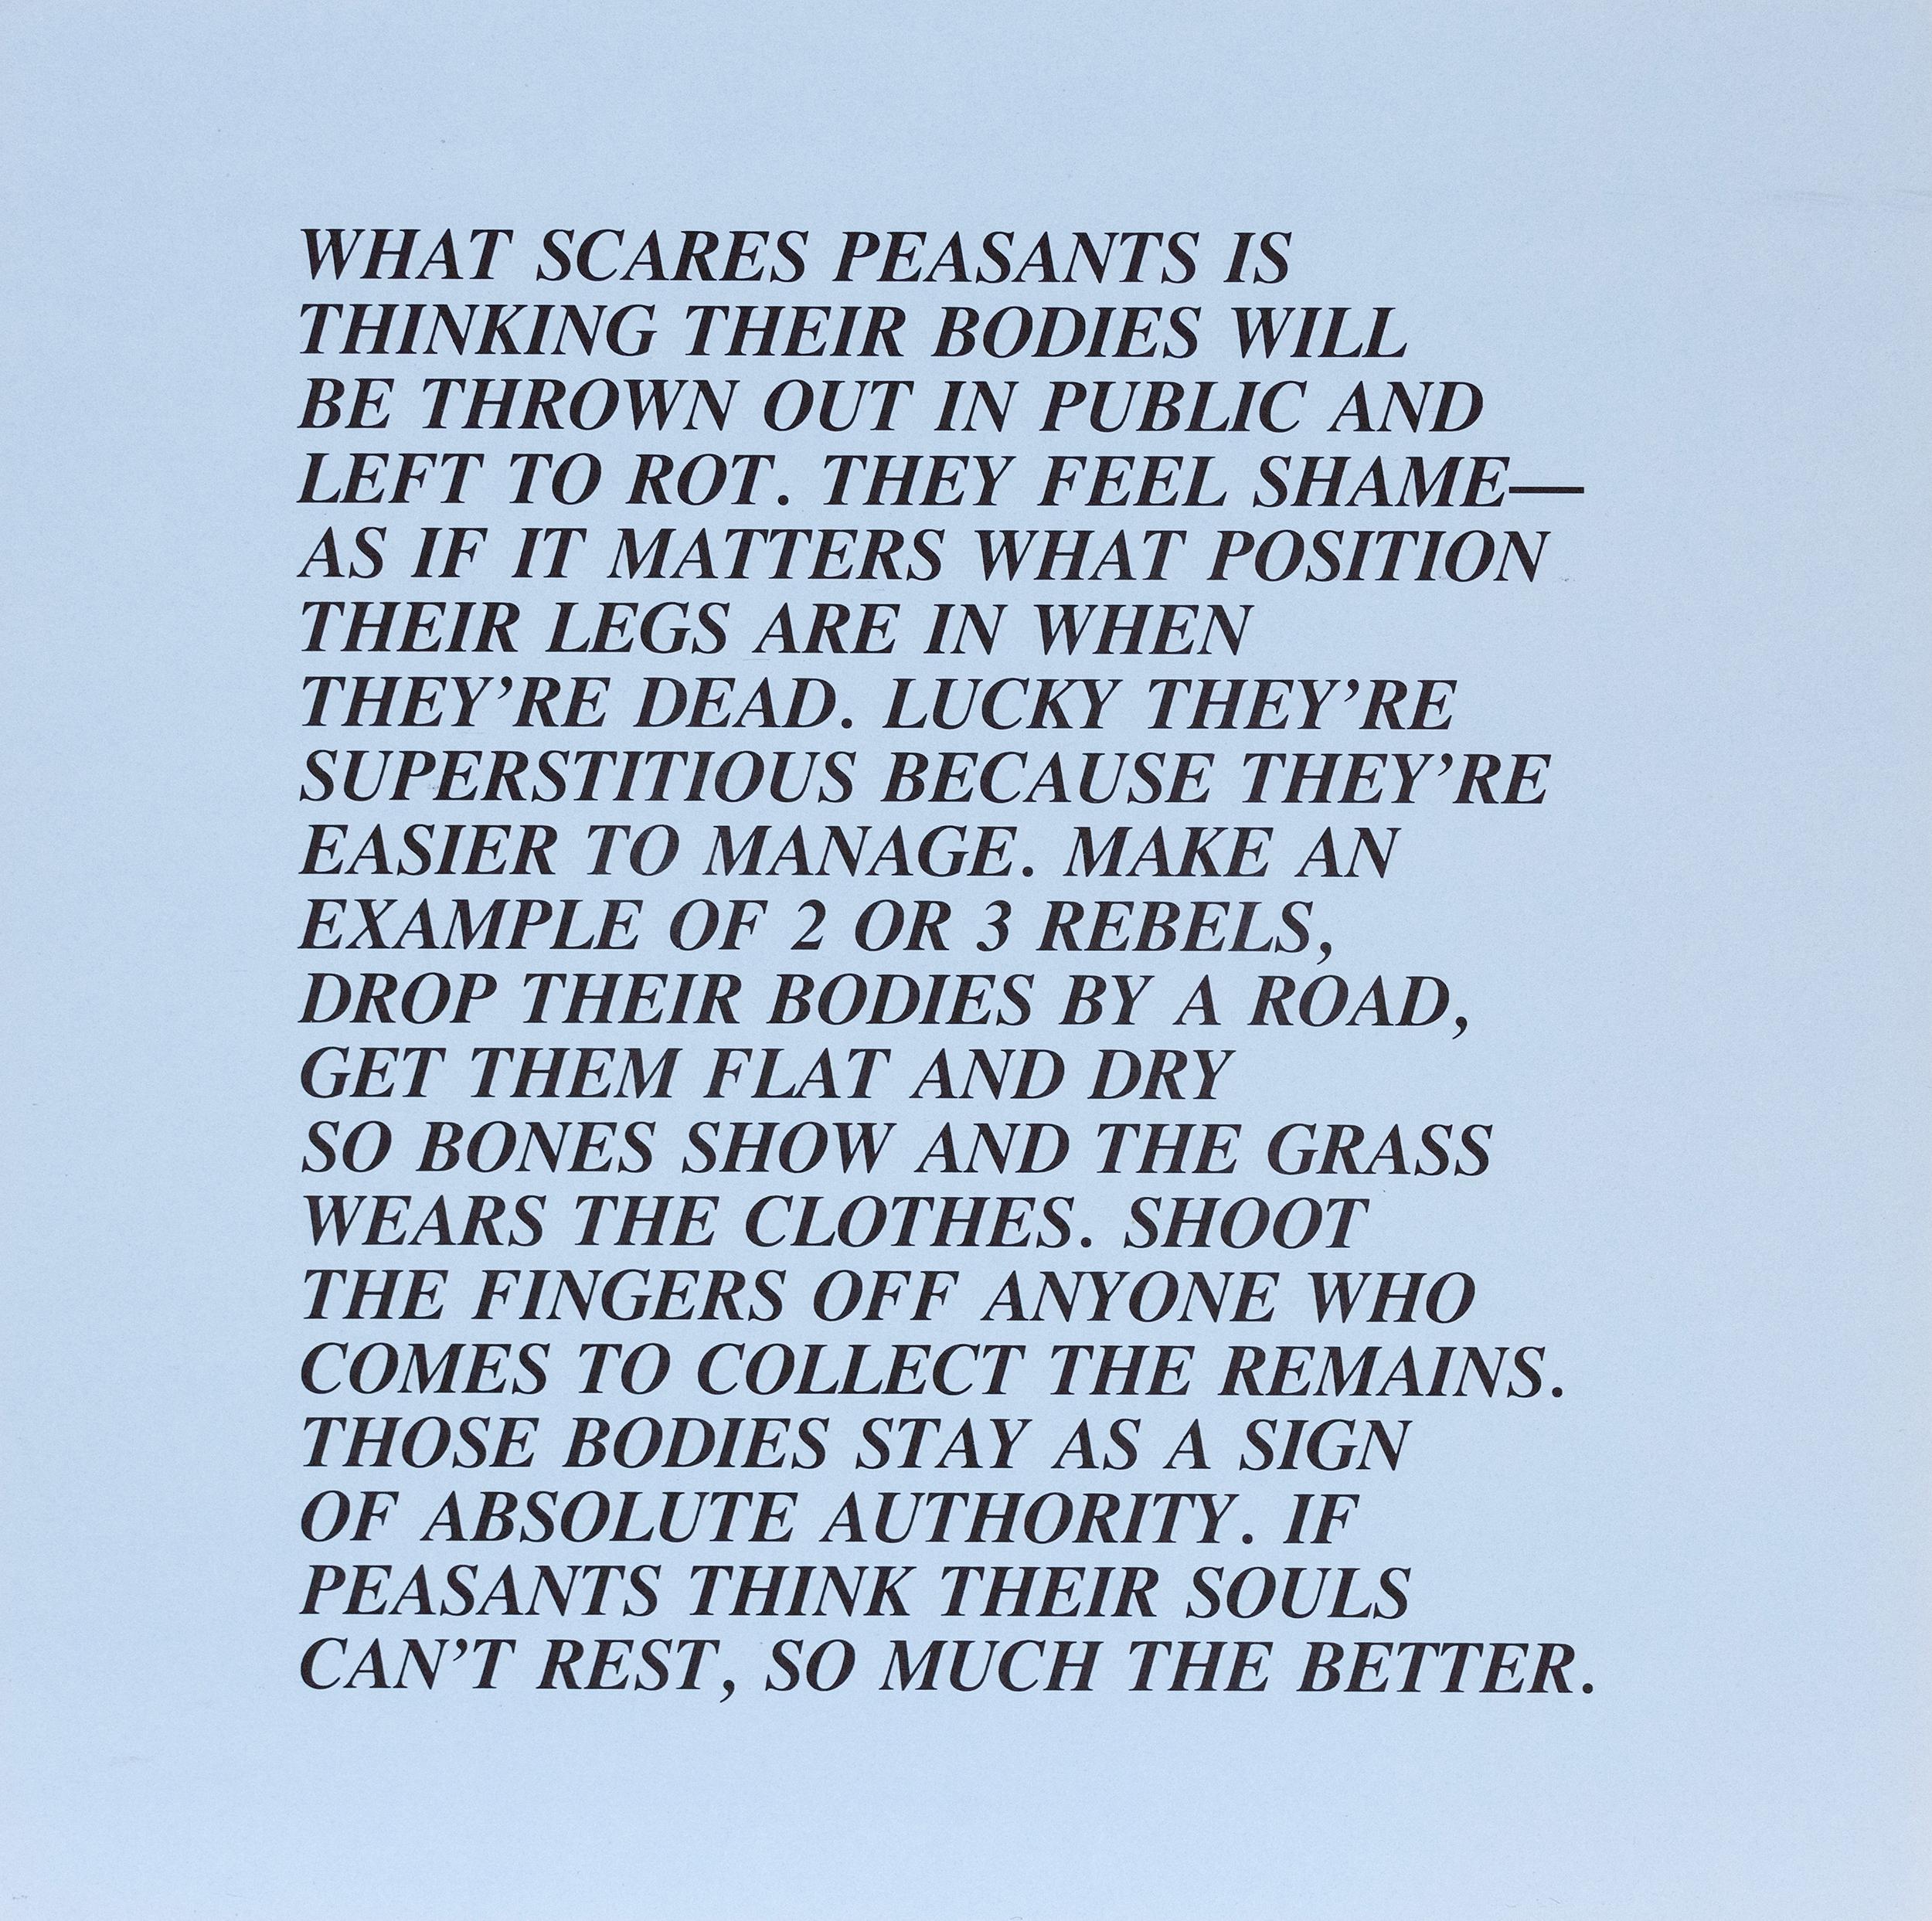 Jenny Holzer is one of the most important and original artists of the 20th century.

Her body of work, with its emphasis on text, is provocative and occasionally frightening, manipulating the language of folk wisdom, pop culture, and government